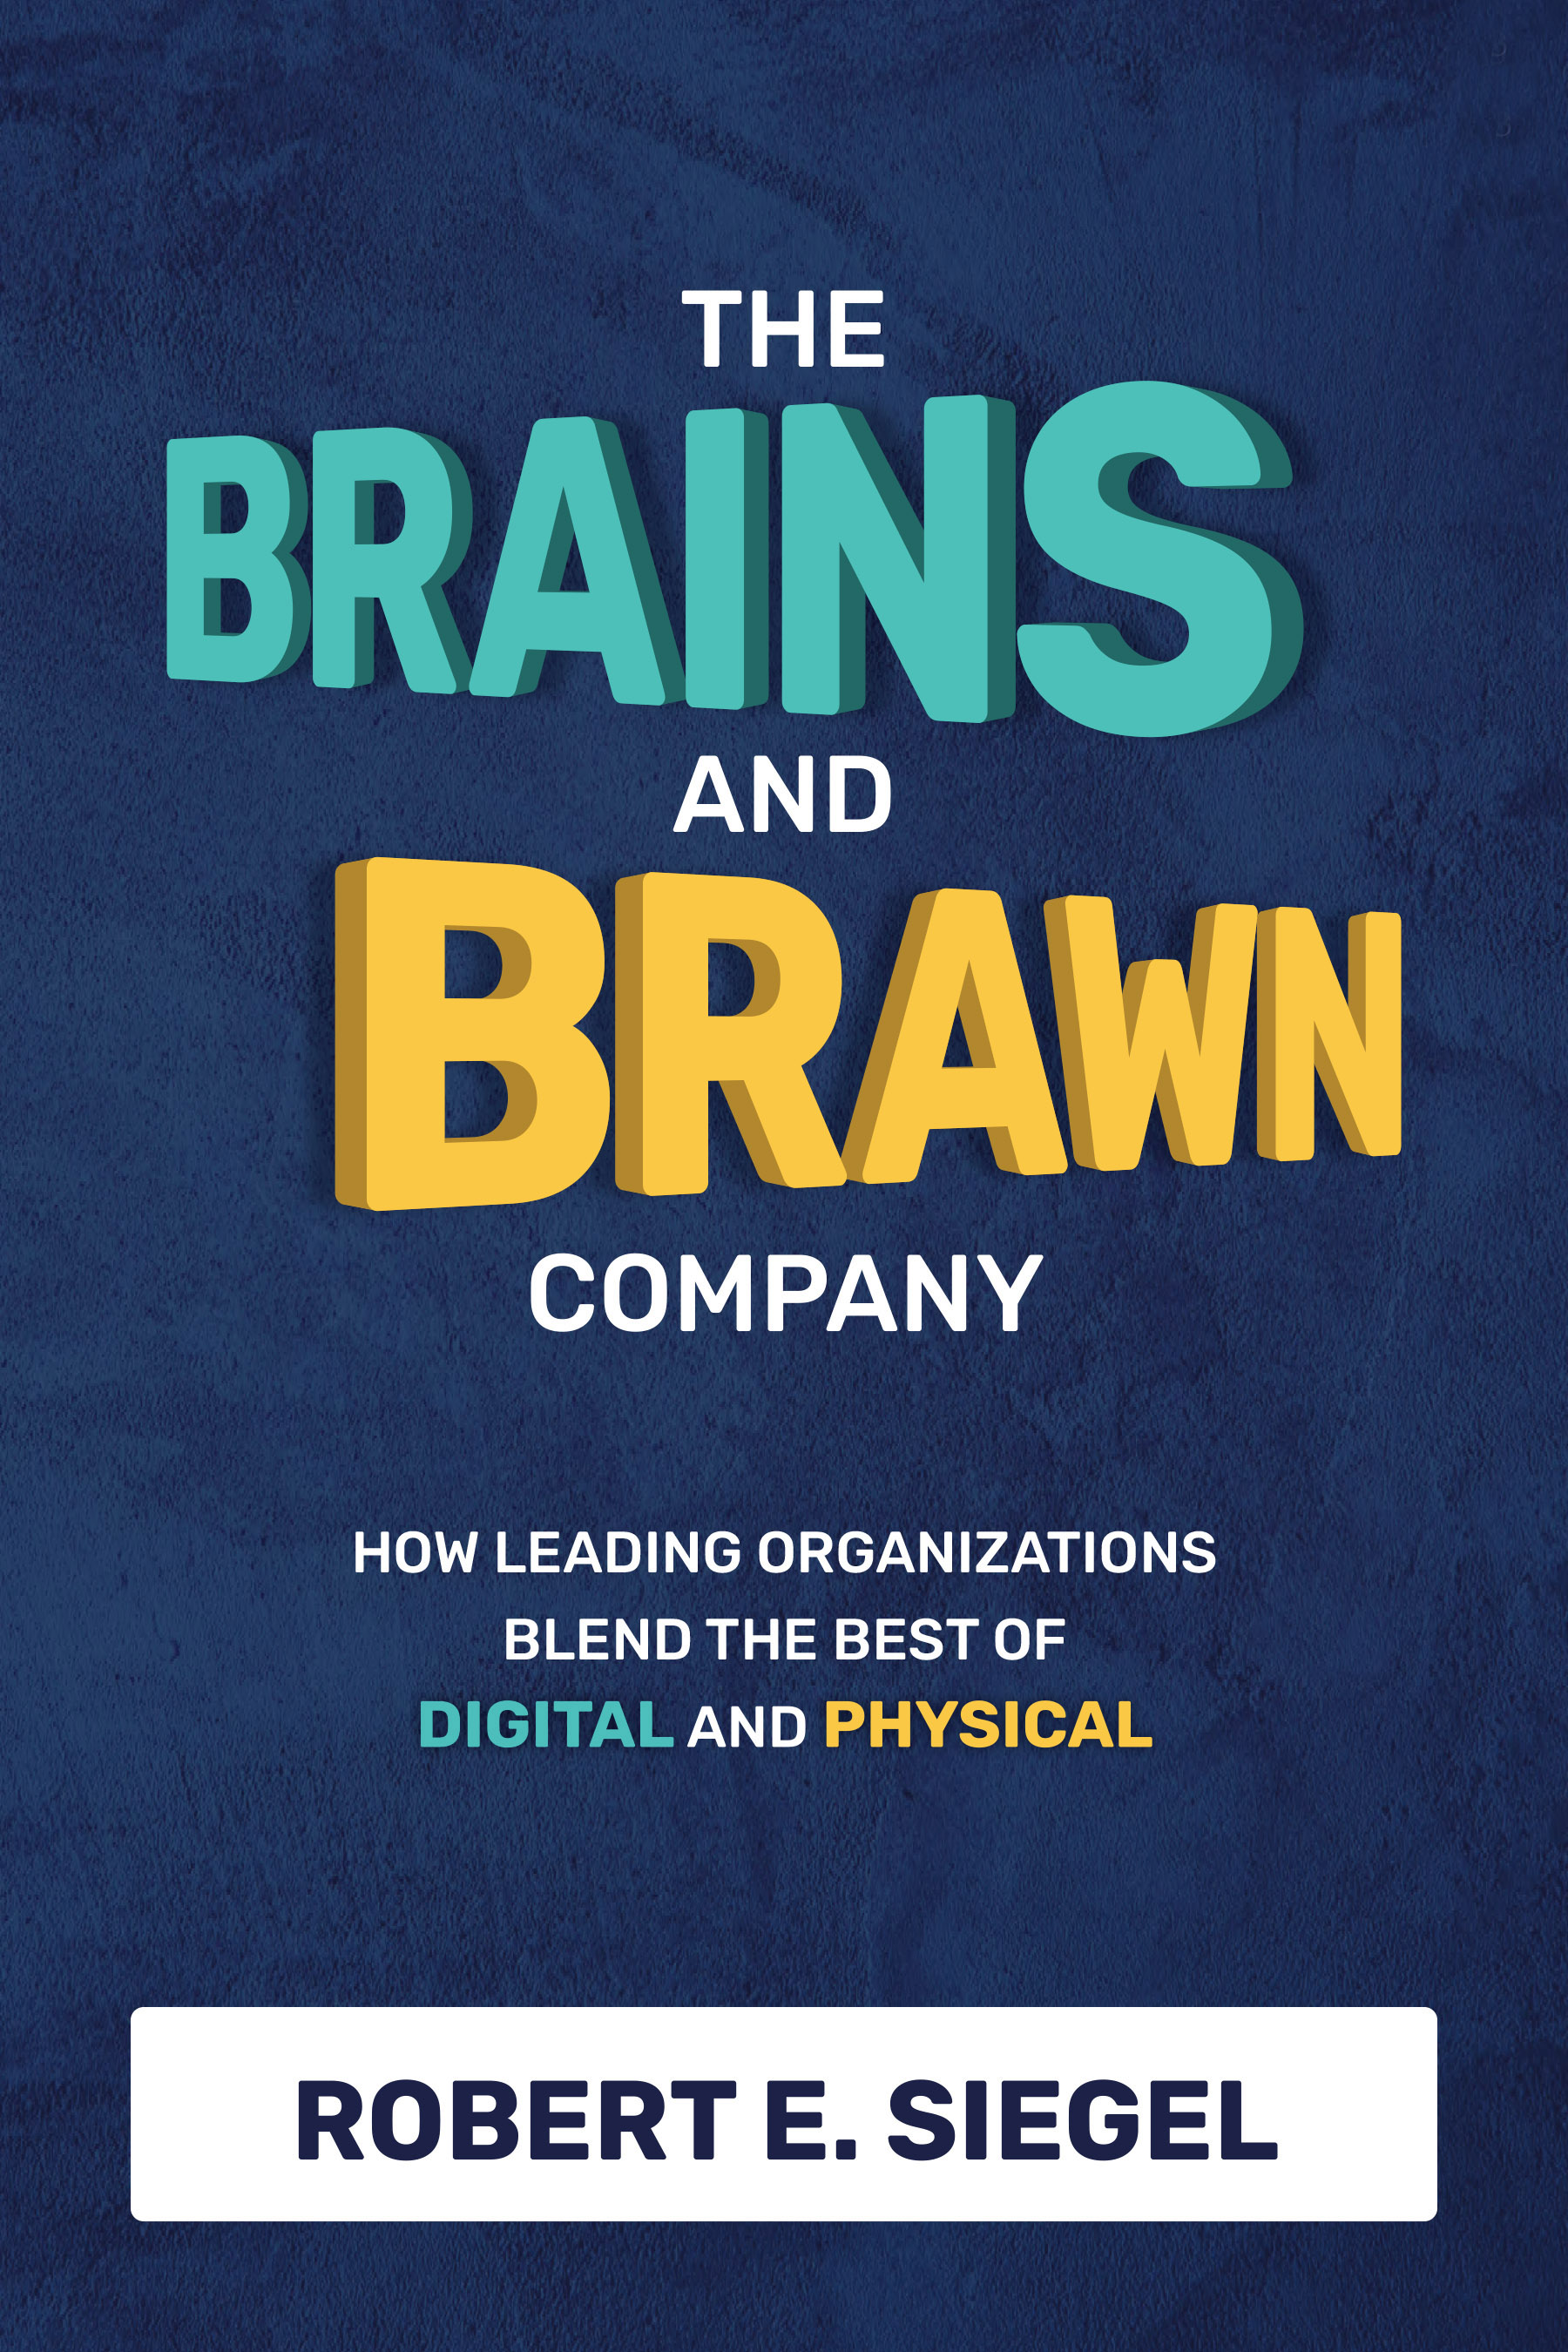 Brains and Brawn Company: How Leading Organizations Blend the Best of Digital and Physical